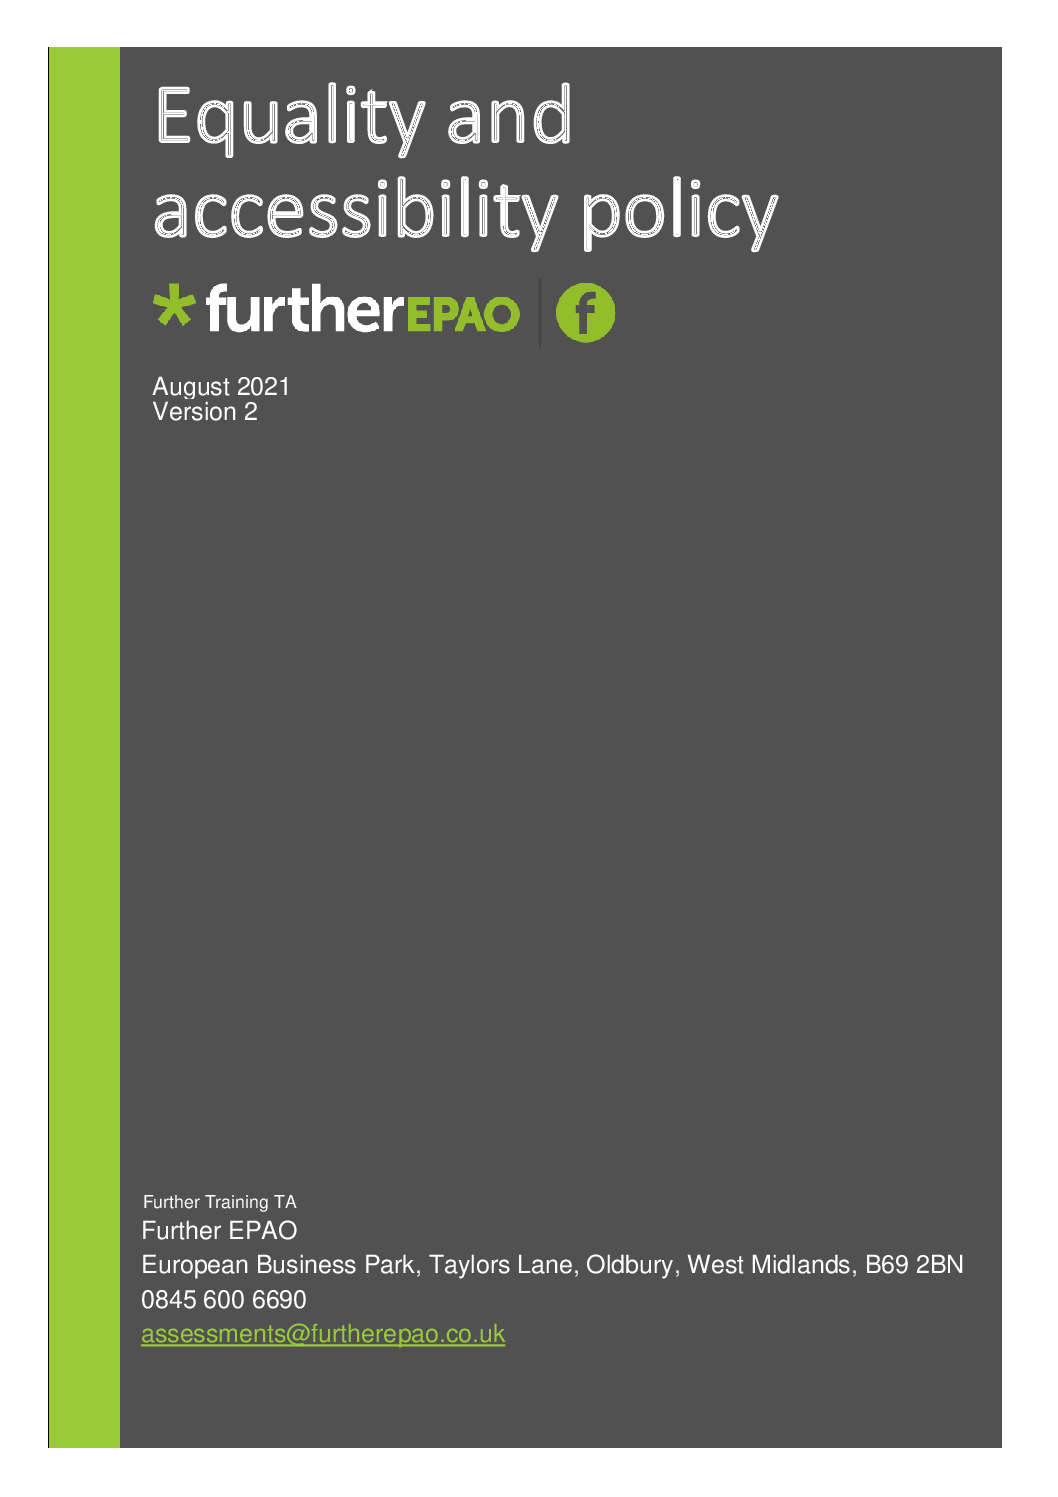 Equality-and-accessibility-policy-V2-August-2021-pdf.jpg